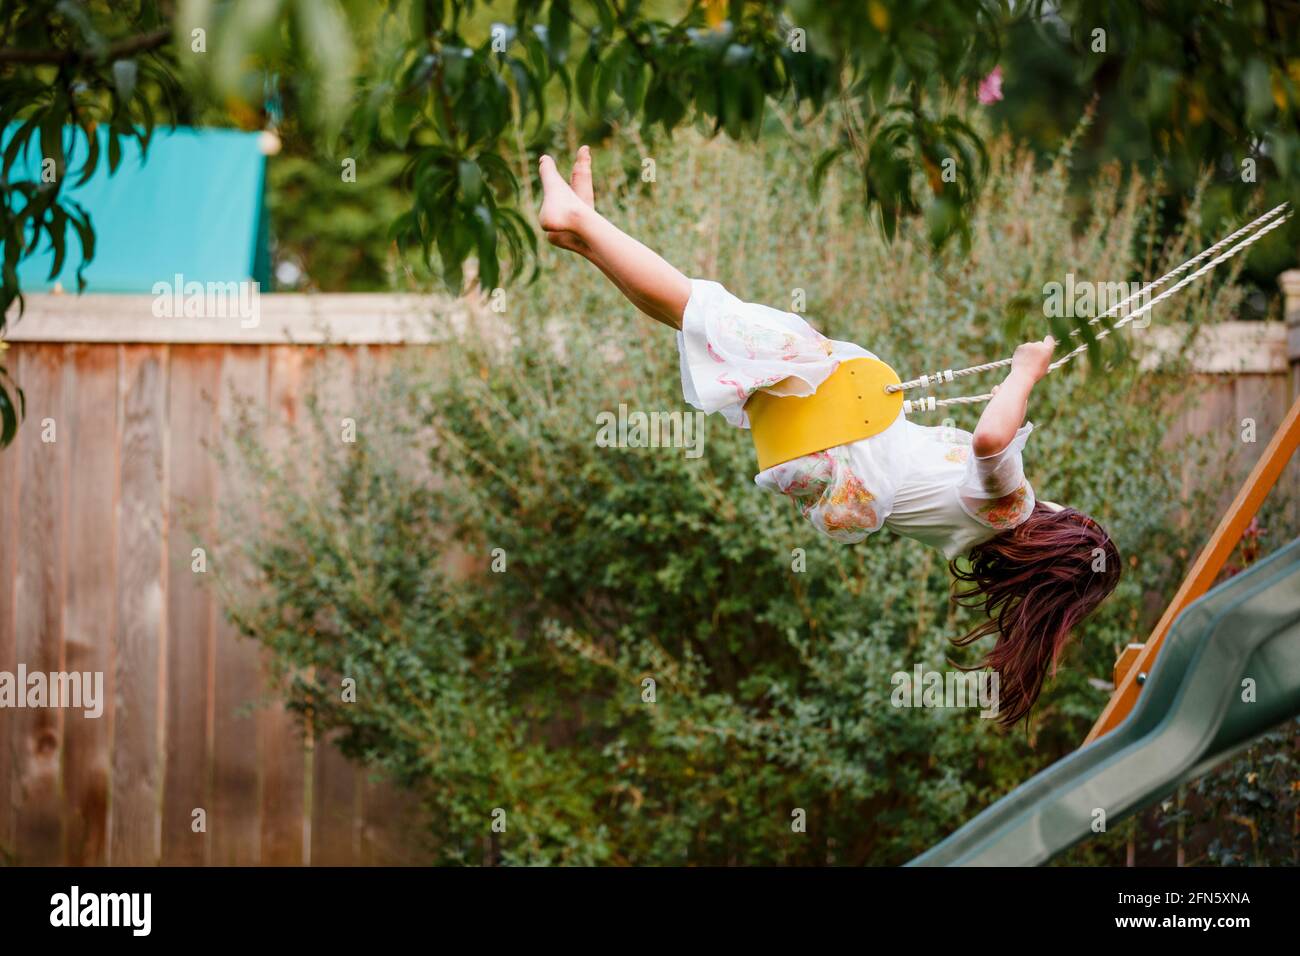 a barefoot child swings high on a playlet in a backyard garden Stock Photo